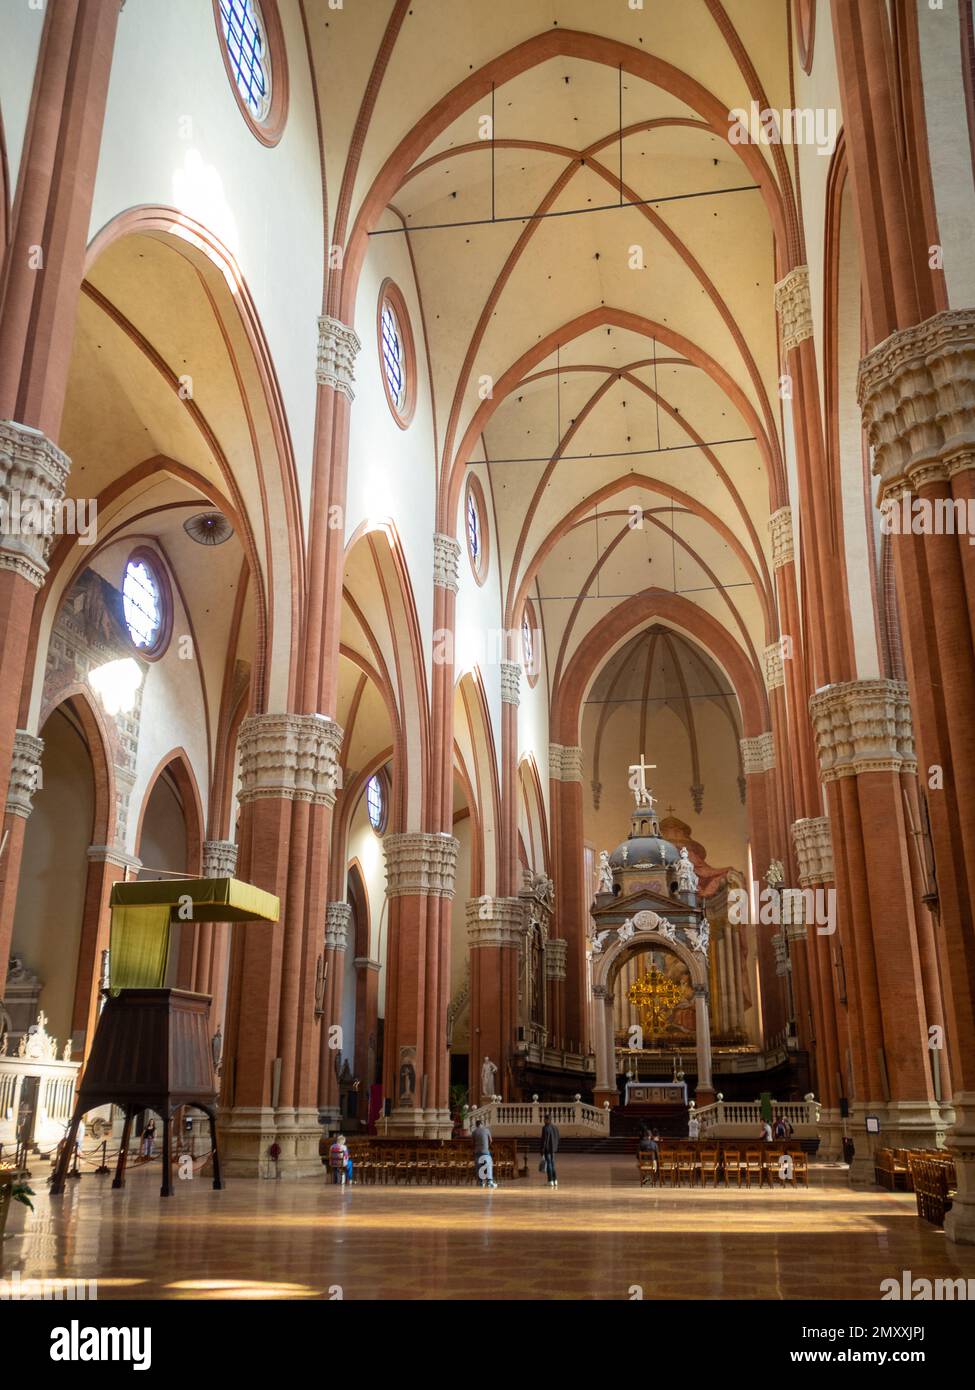 The main nave and high altar of San Petronio, Bologna Stock Photo